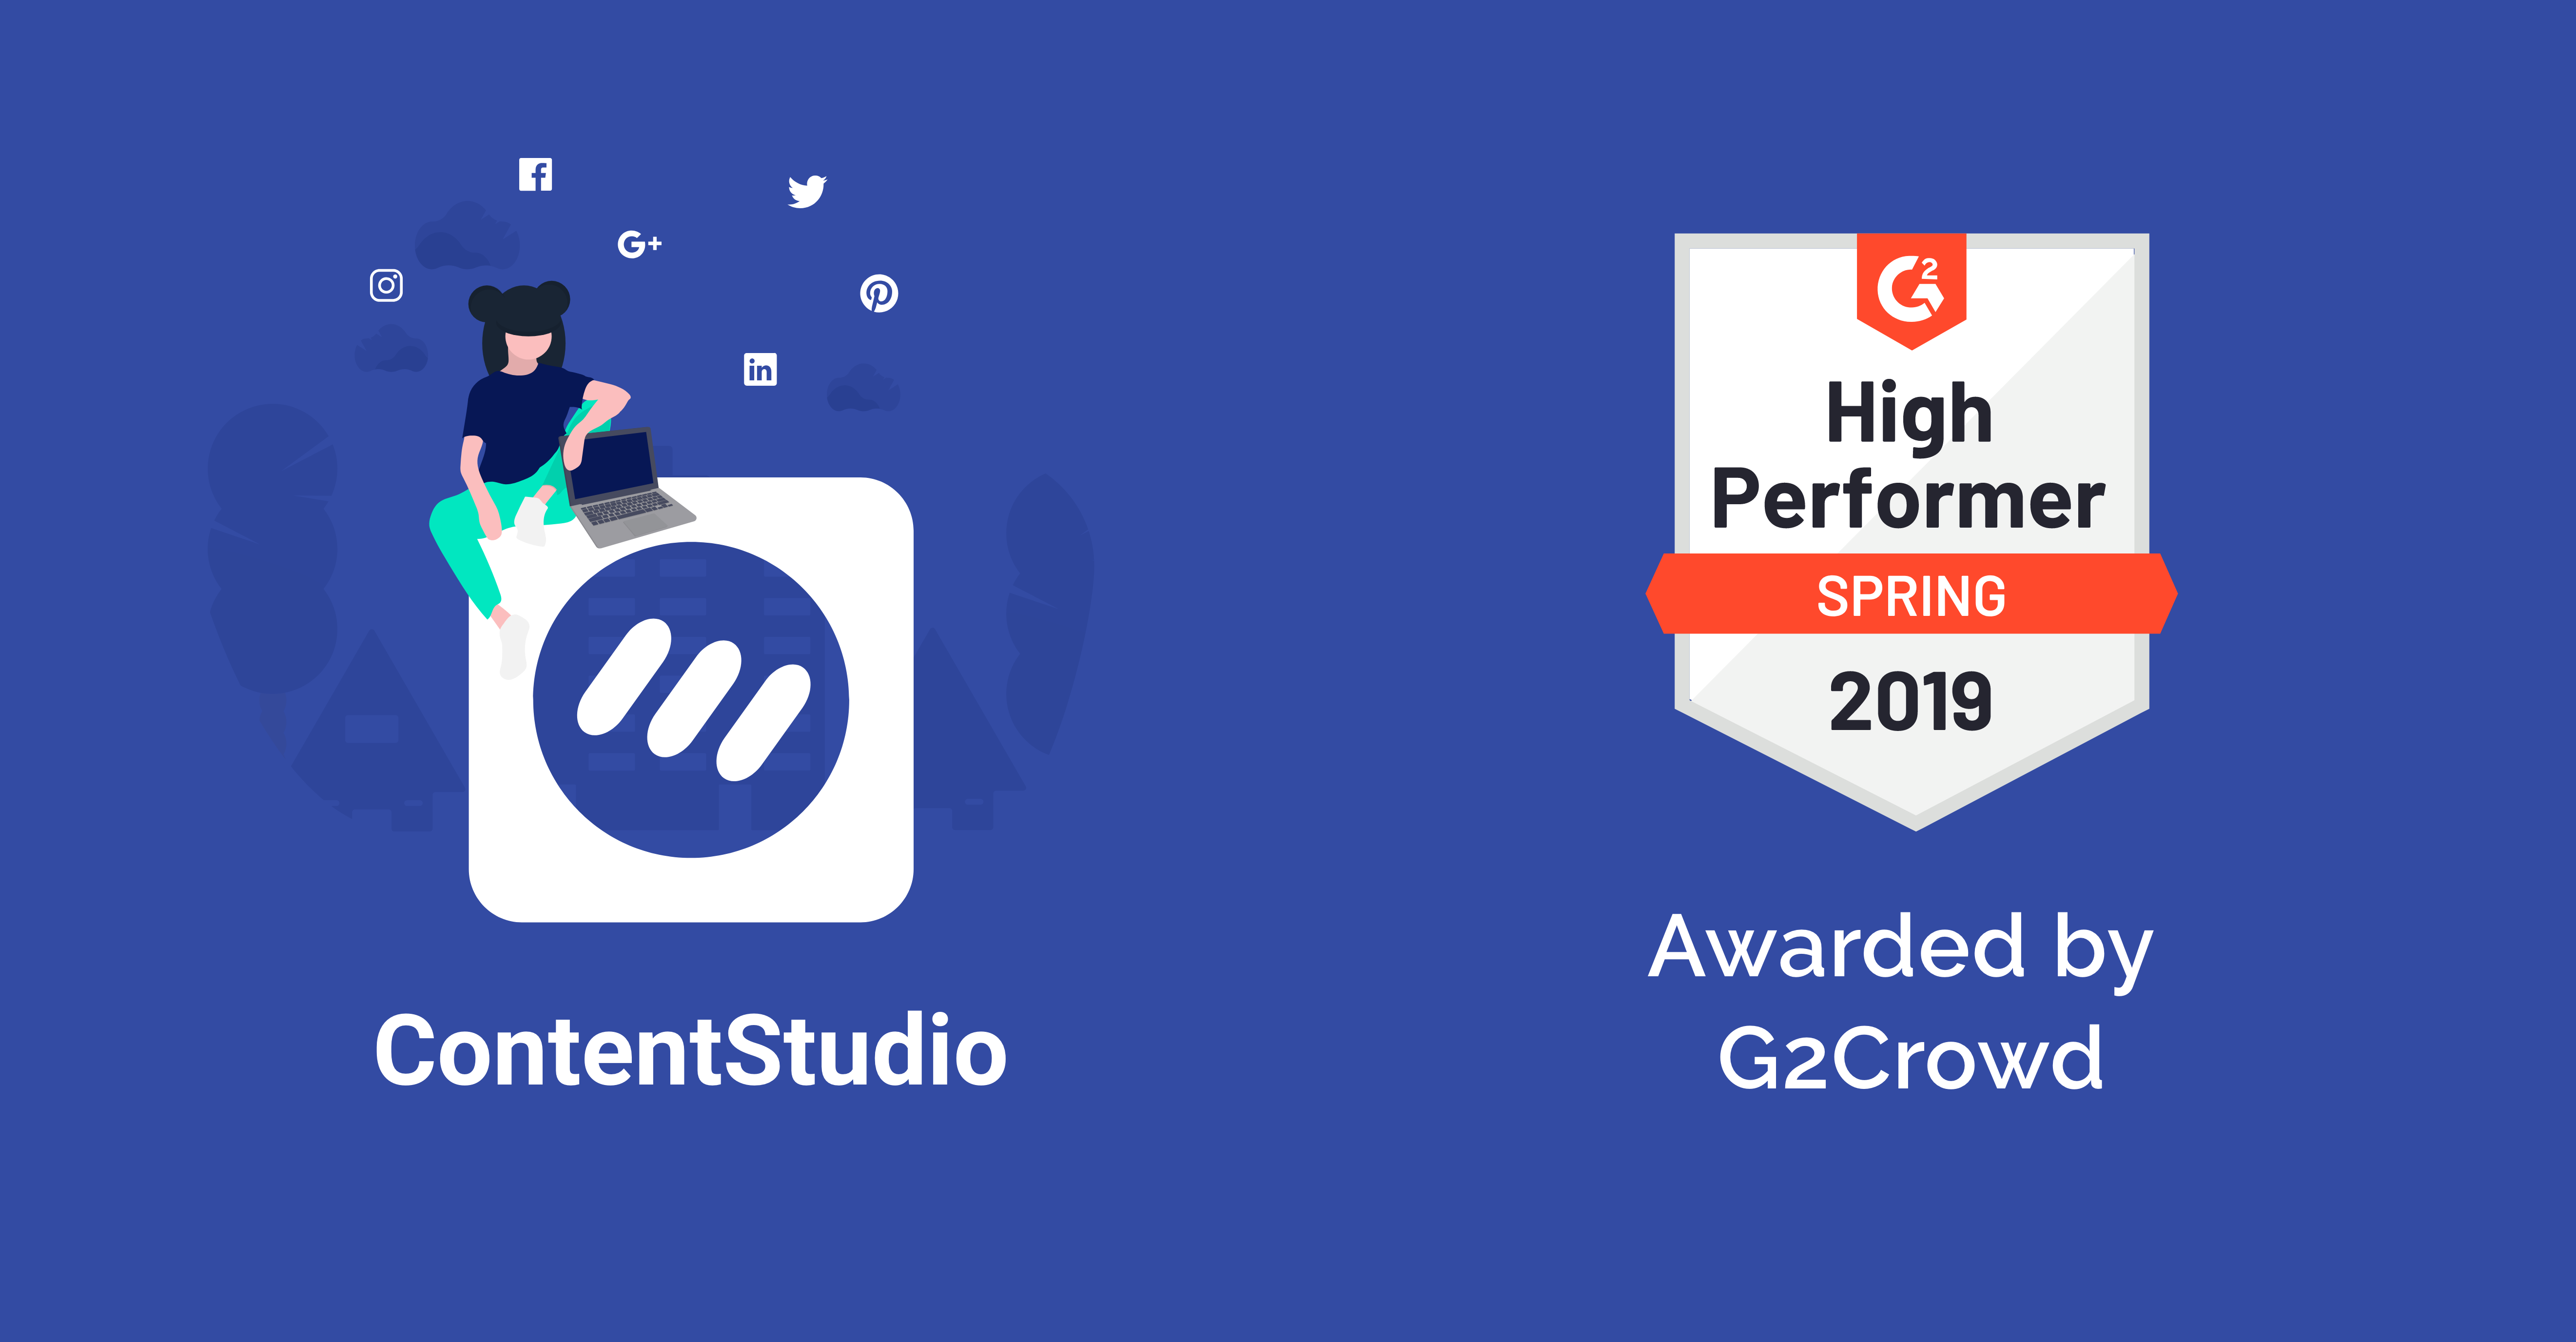 G2 names ContentStudio as High performer for Spring 2019